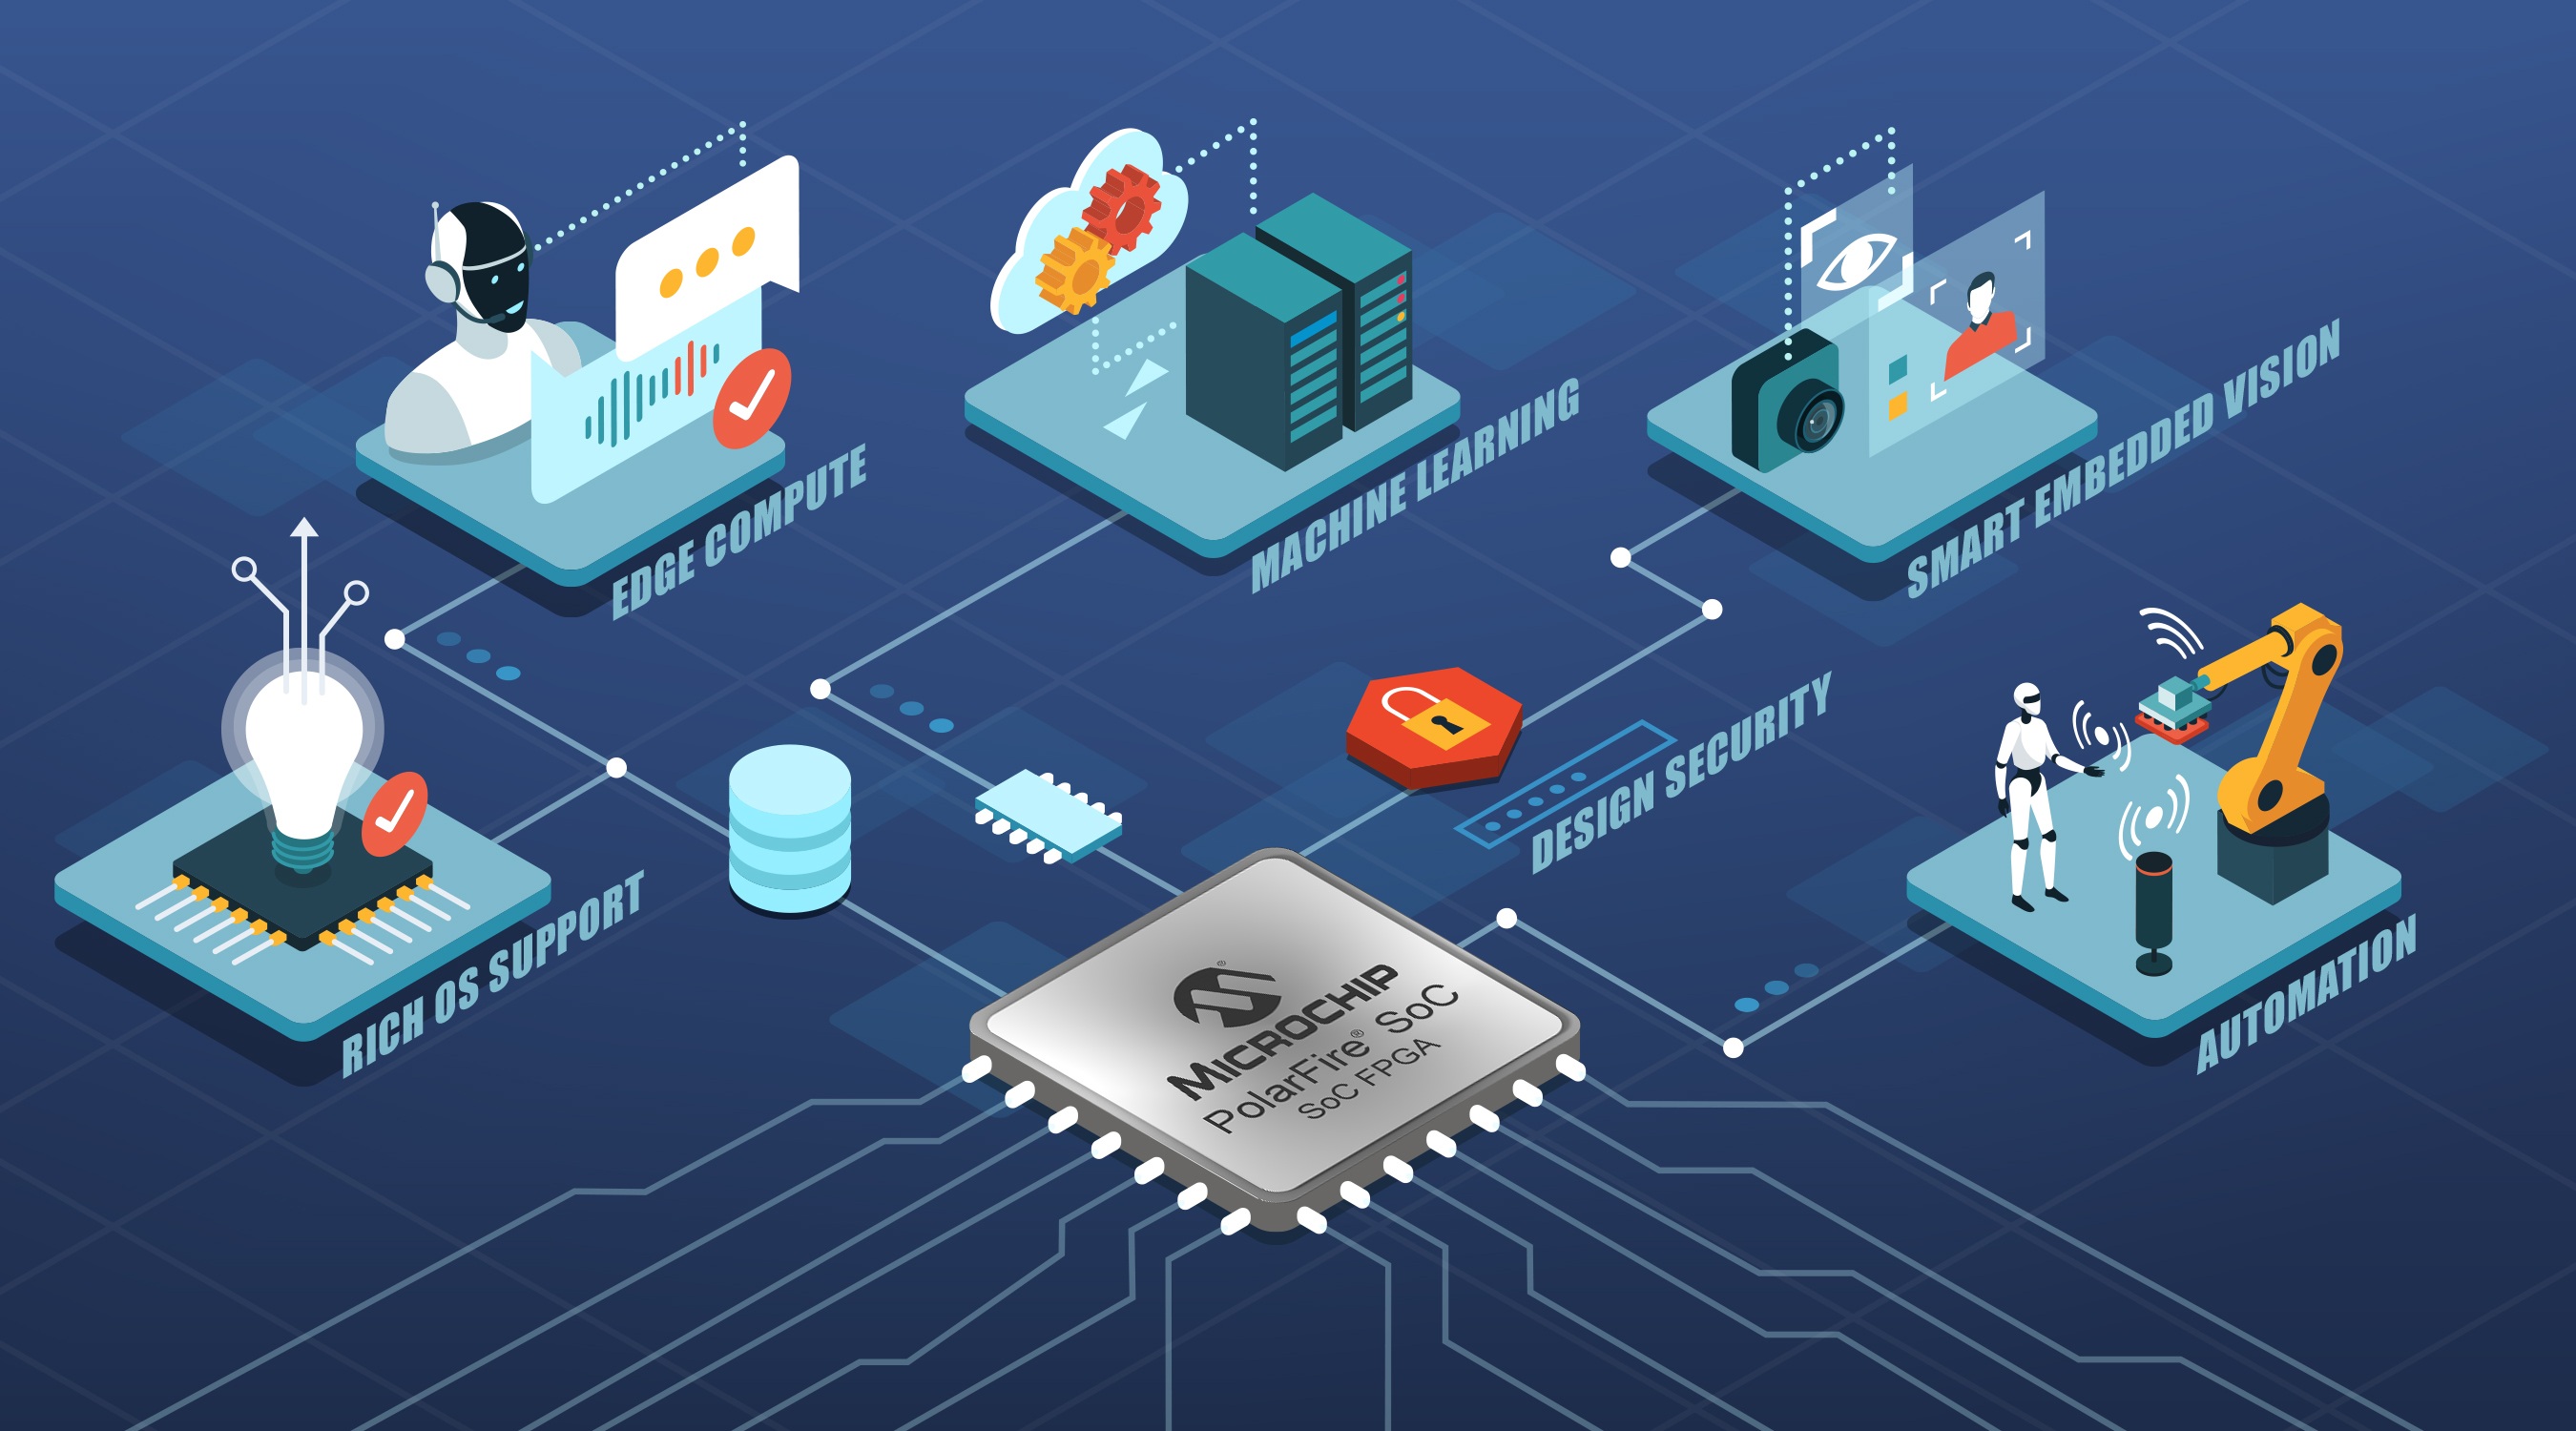 Microchip released a new generation of development tools for edge embedded vision design, helping developers to develop with low-power PolarFire RISC-V SoC FPGAs